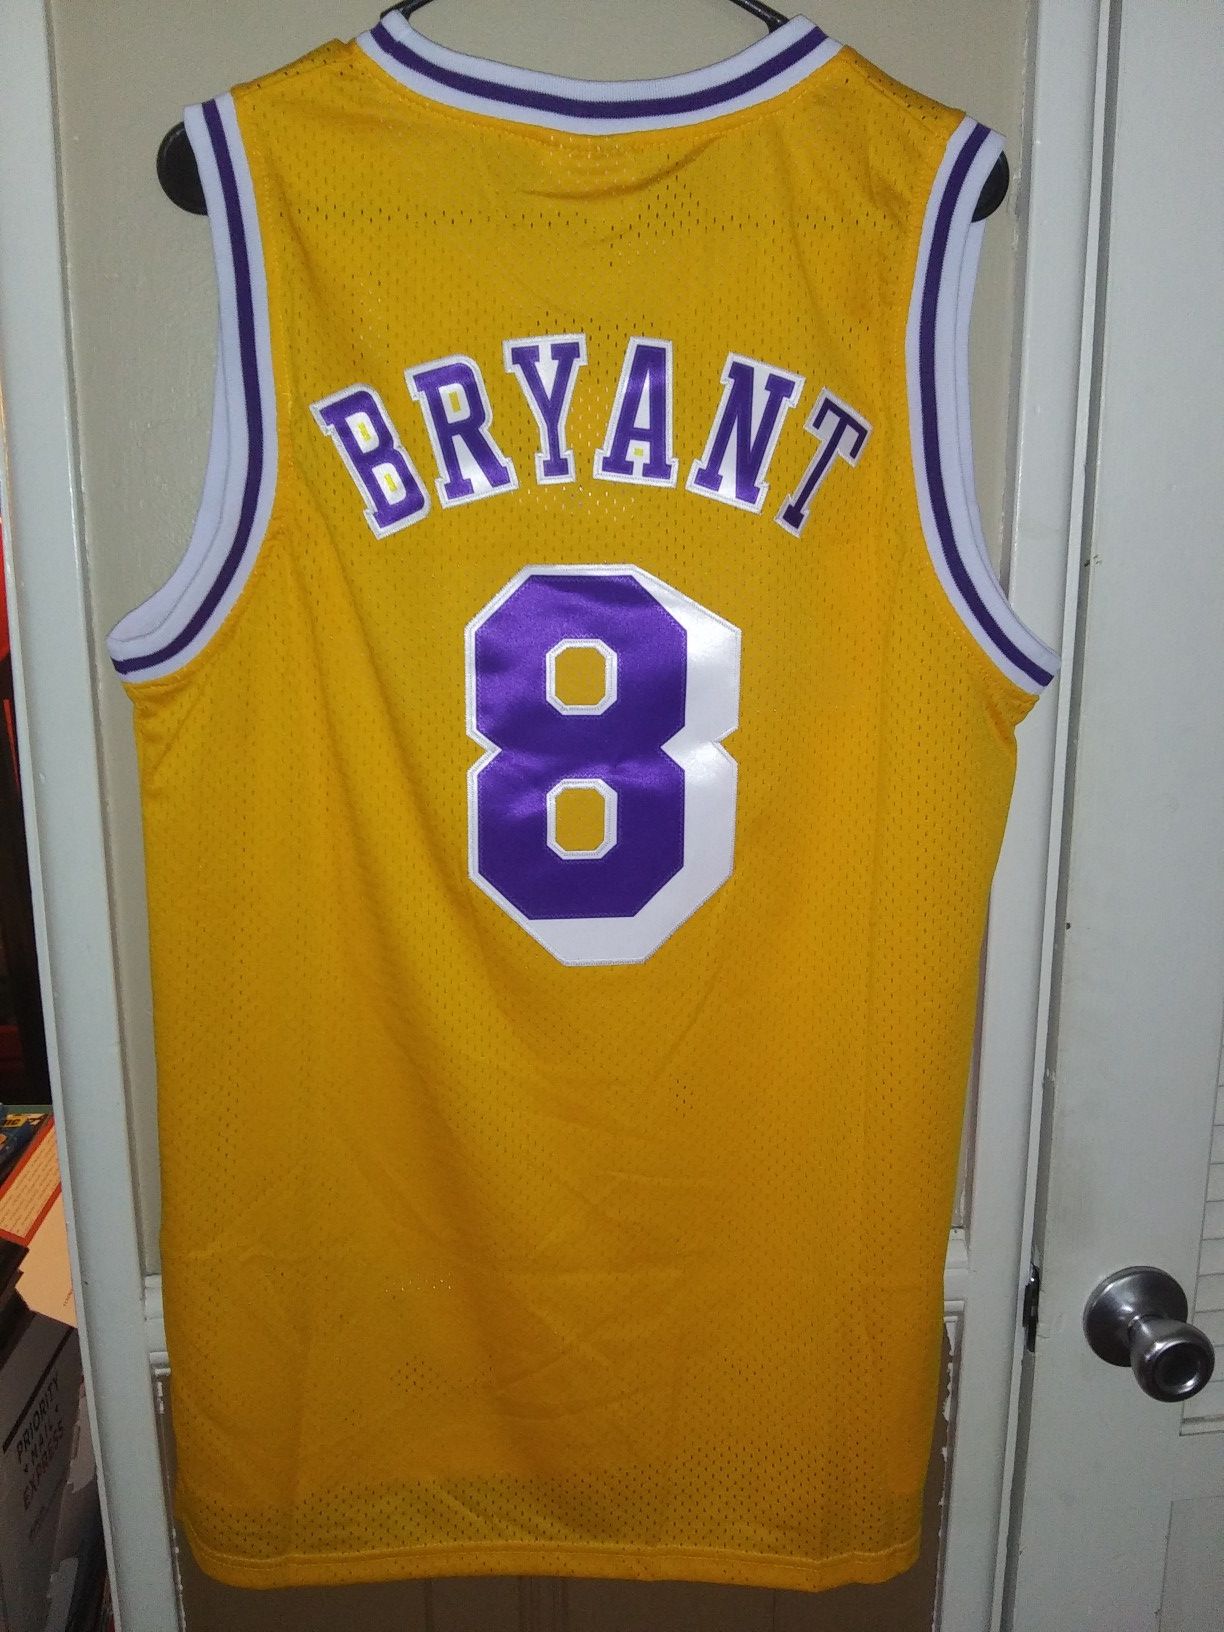 New!!! Mens Medium Kobe Bryant Los Angeles Lakers Jersey New Stitched $50. Ships +$3. Pick up in West Covina